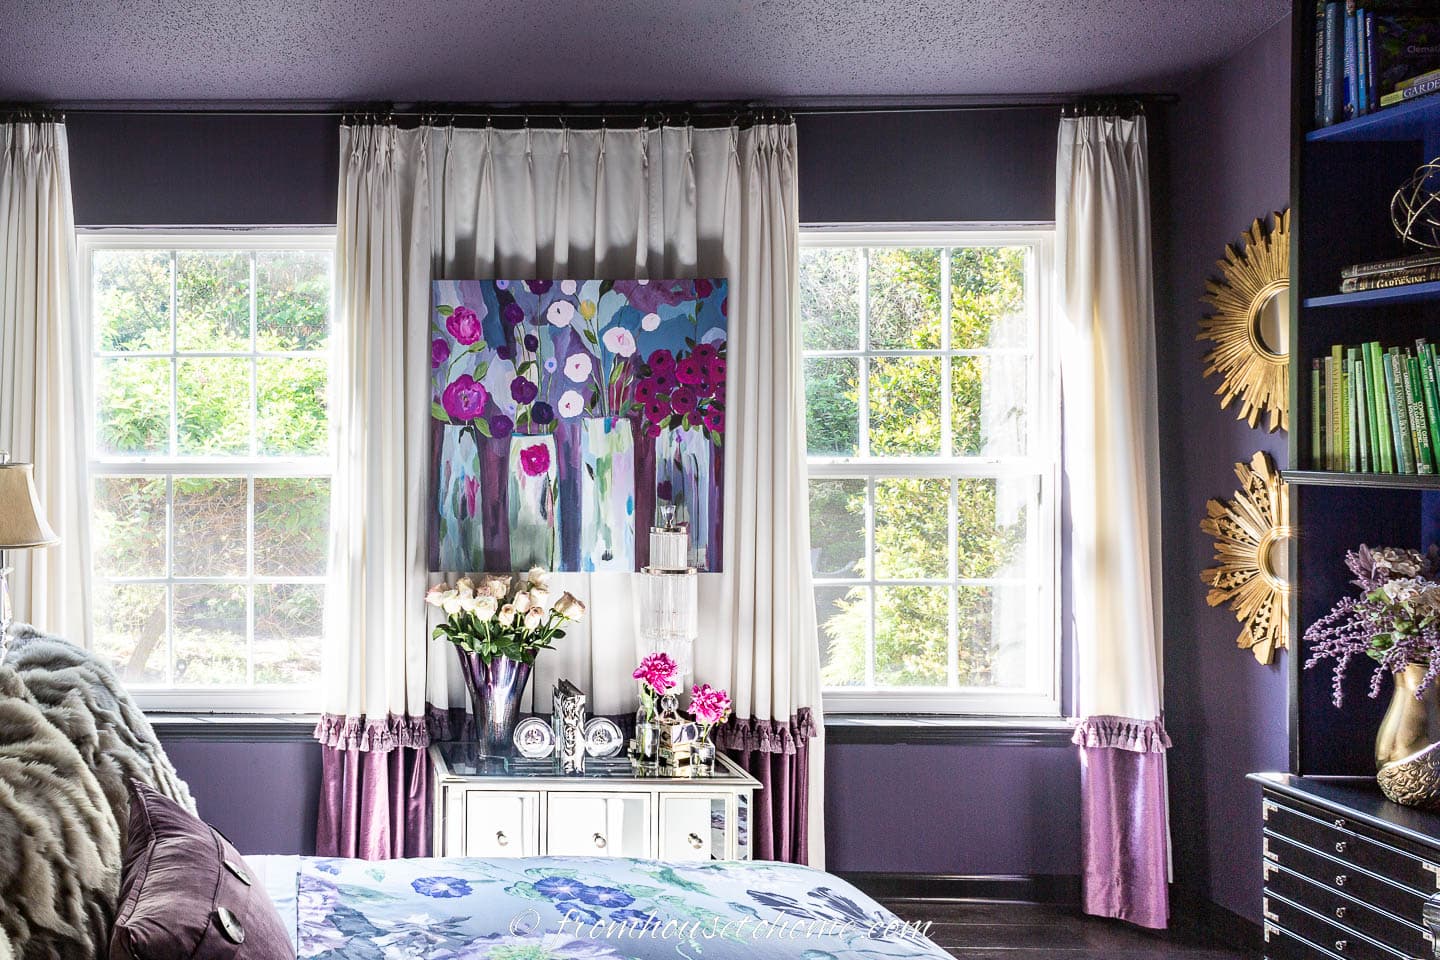 Bedroom walls and ceiling painted dark purple with white and purple curtains